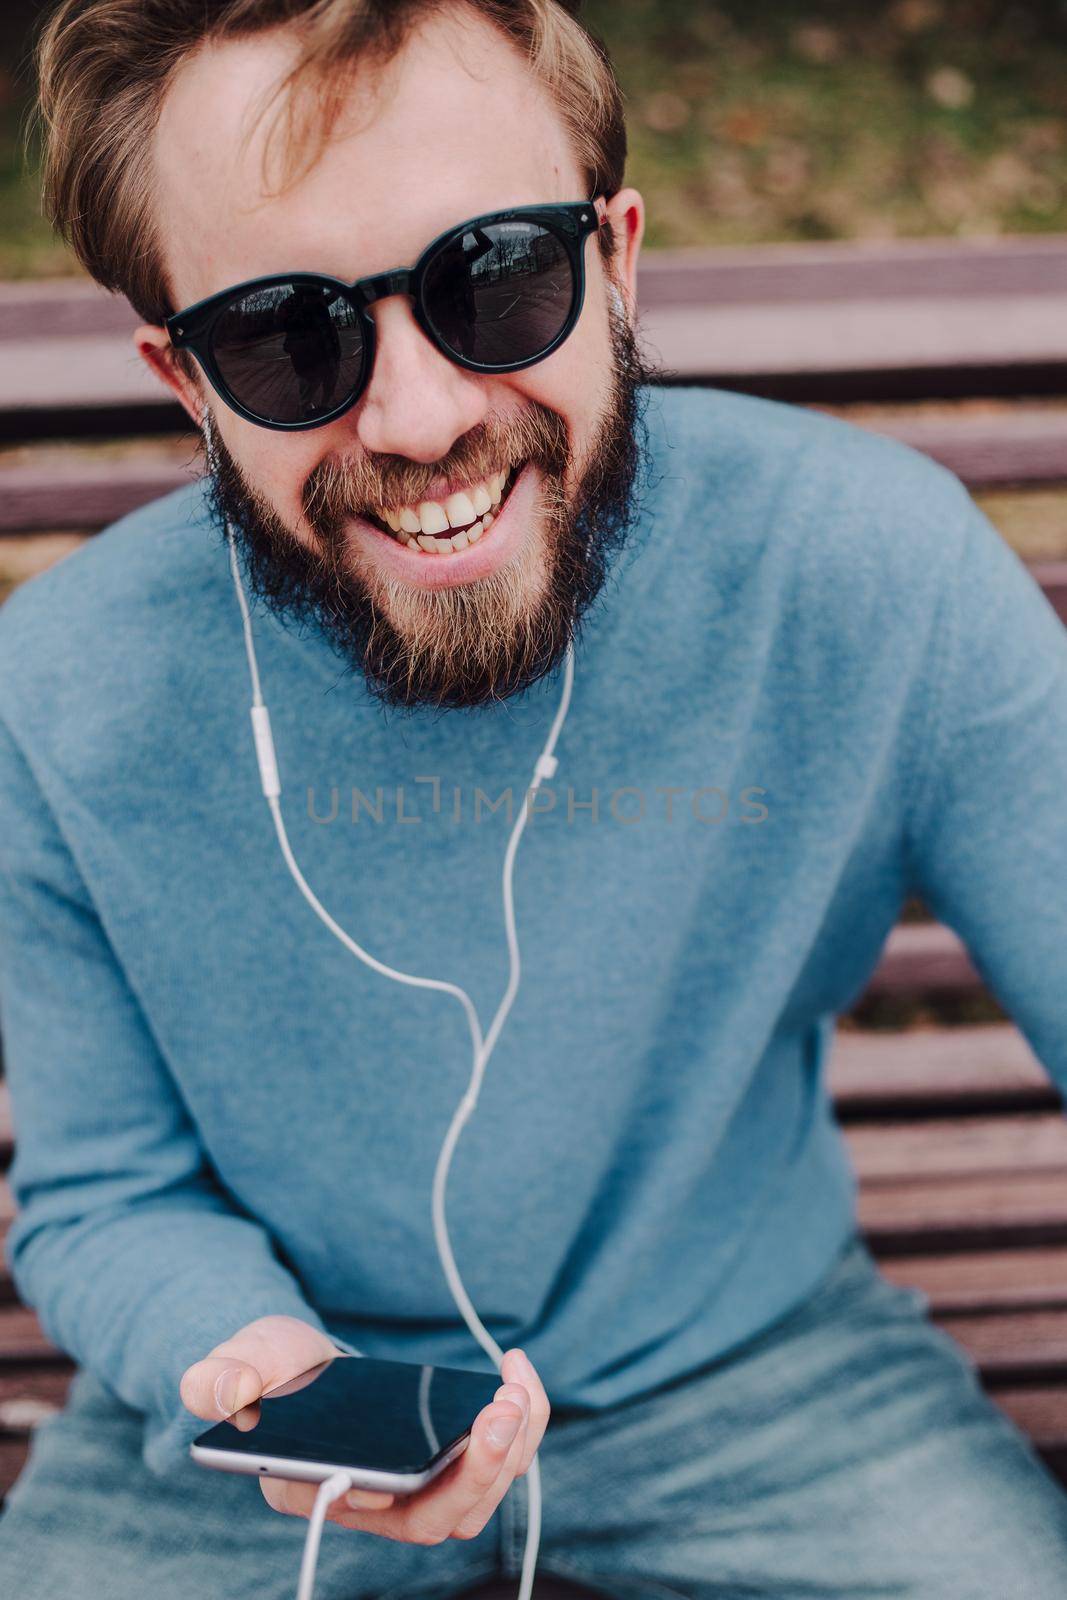 young hipster gay man listening music with headphones siting in a park